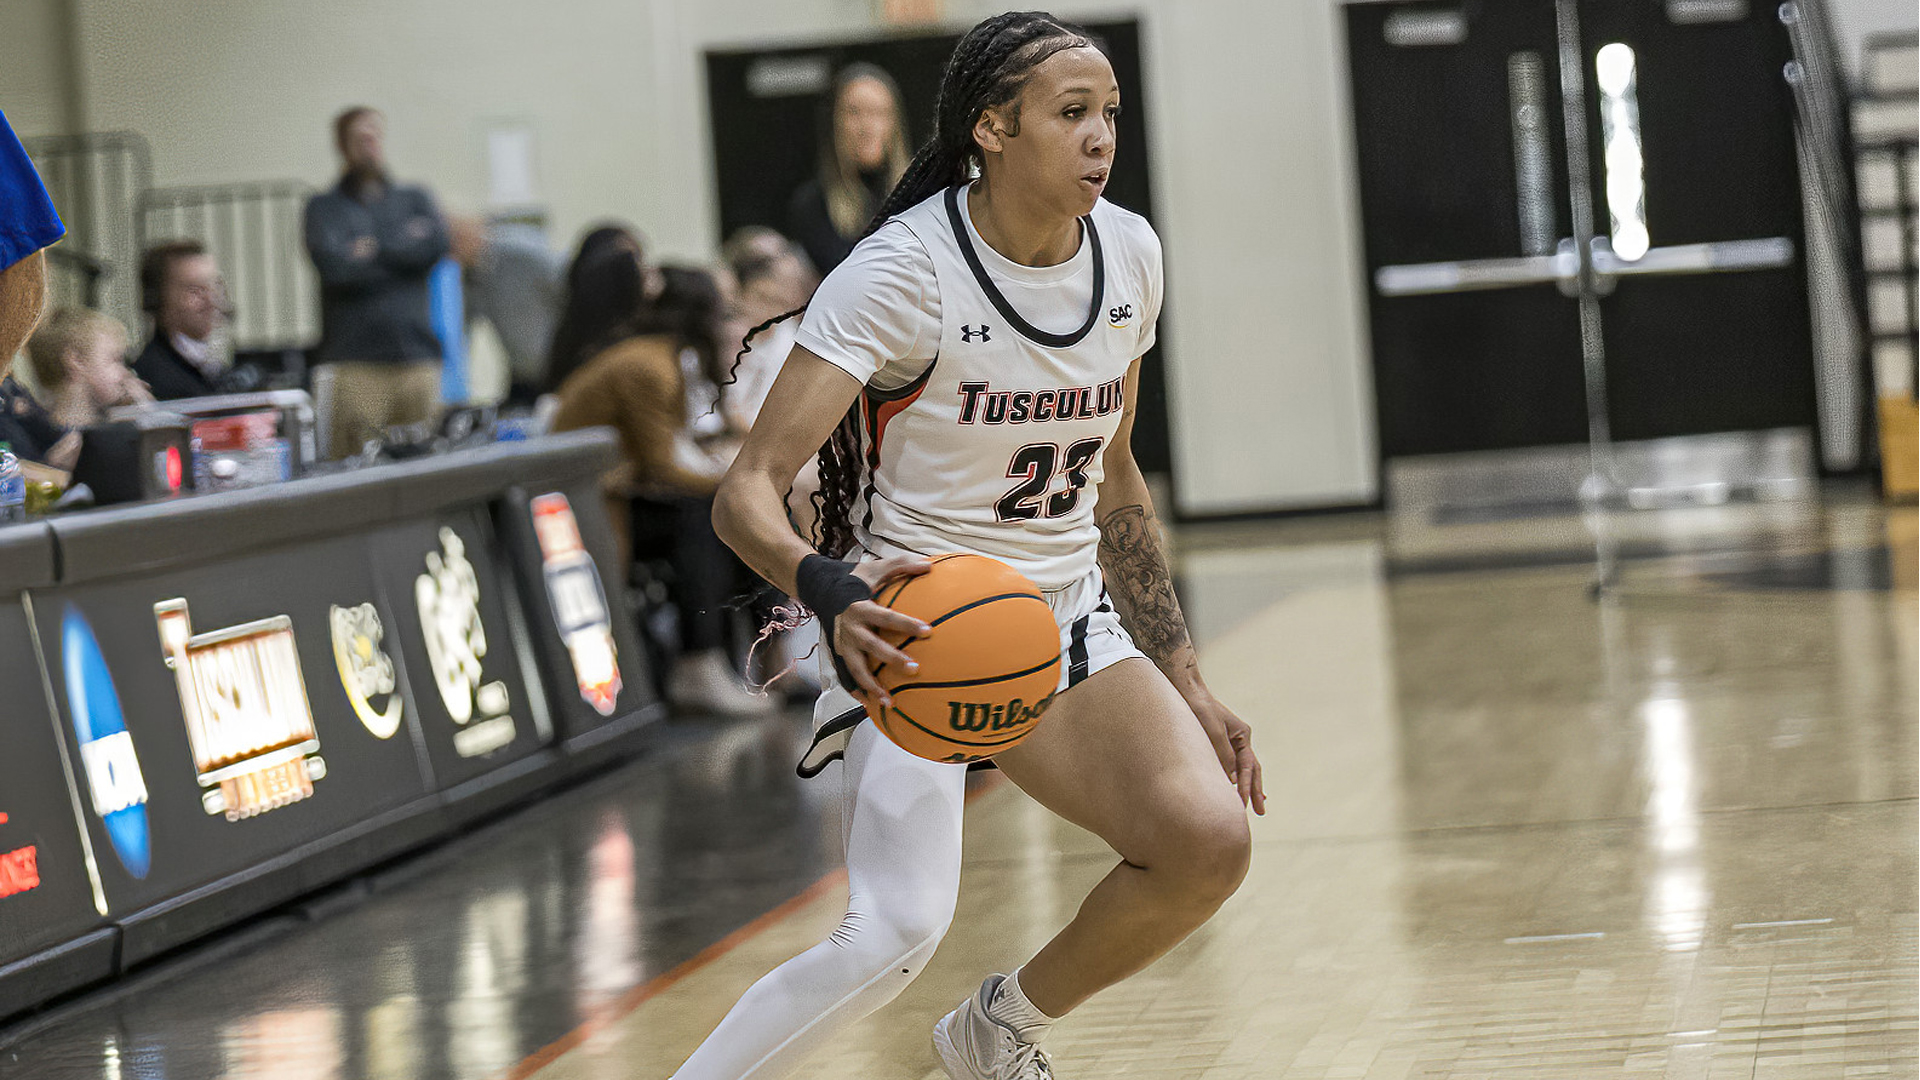 Mya Belton recorded 22 points and 13 rebounds in Tusculum's 65-59 win over Southern Wesleyan (photo by Chuck Williams)